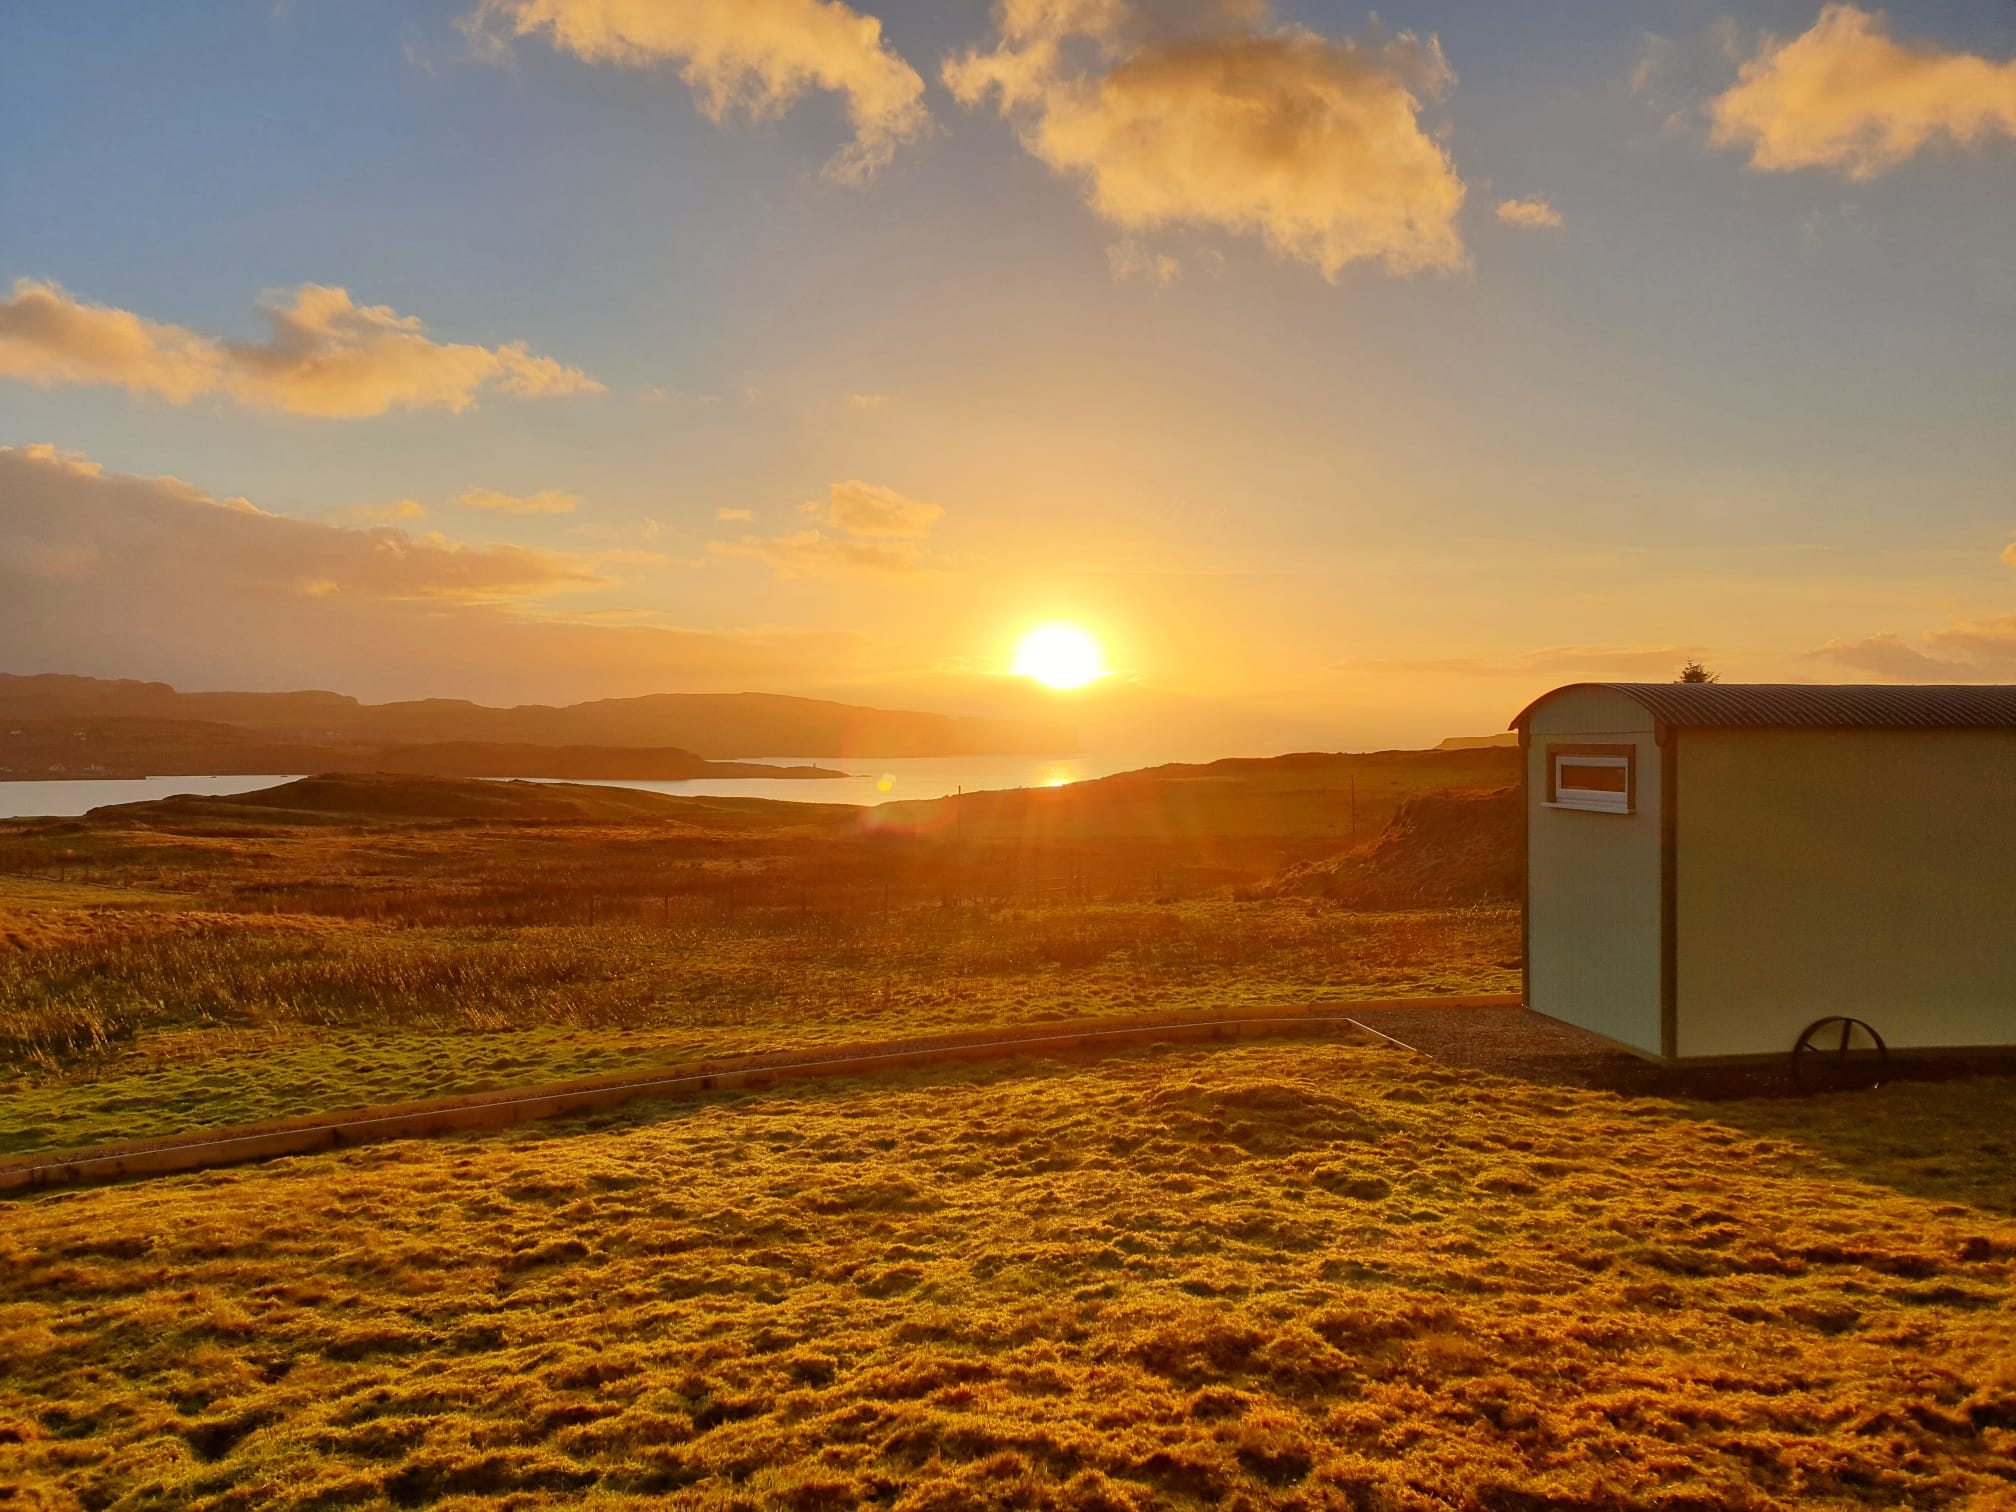 The caravan pictured on the hills, pictured in front of the setting sun